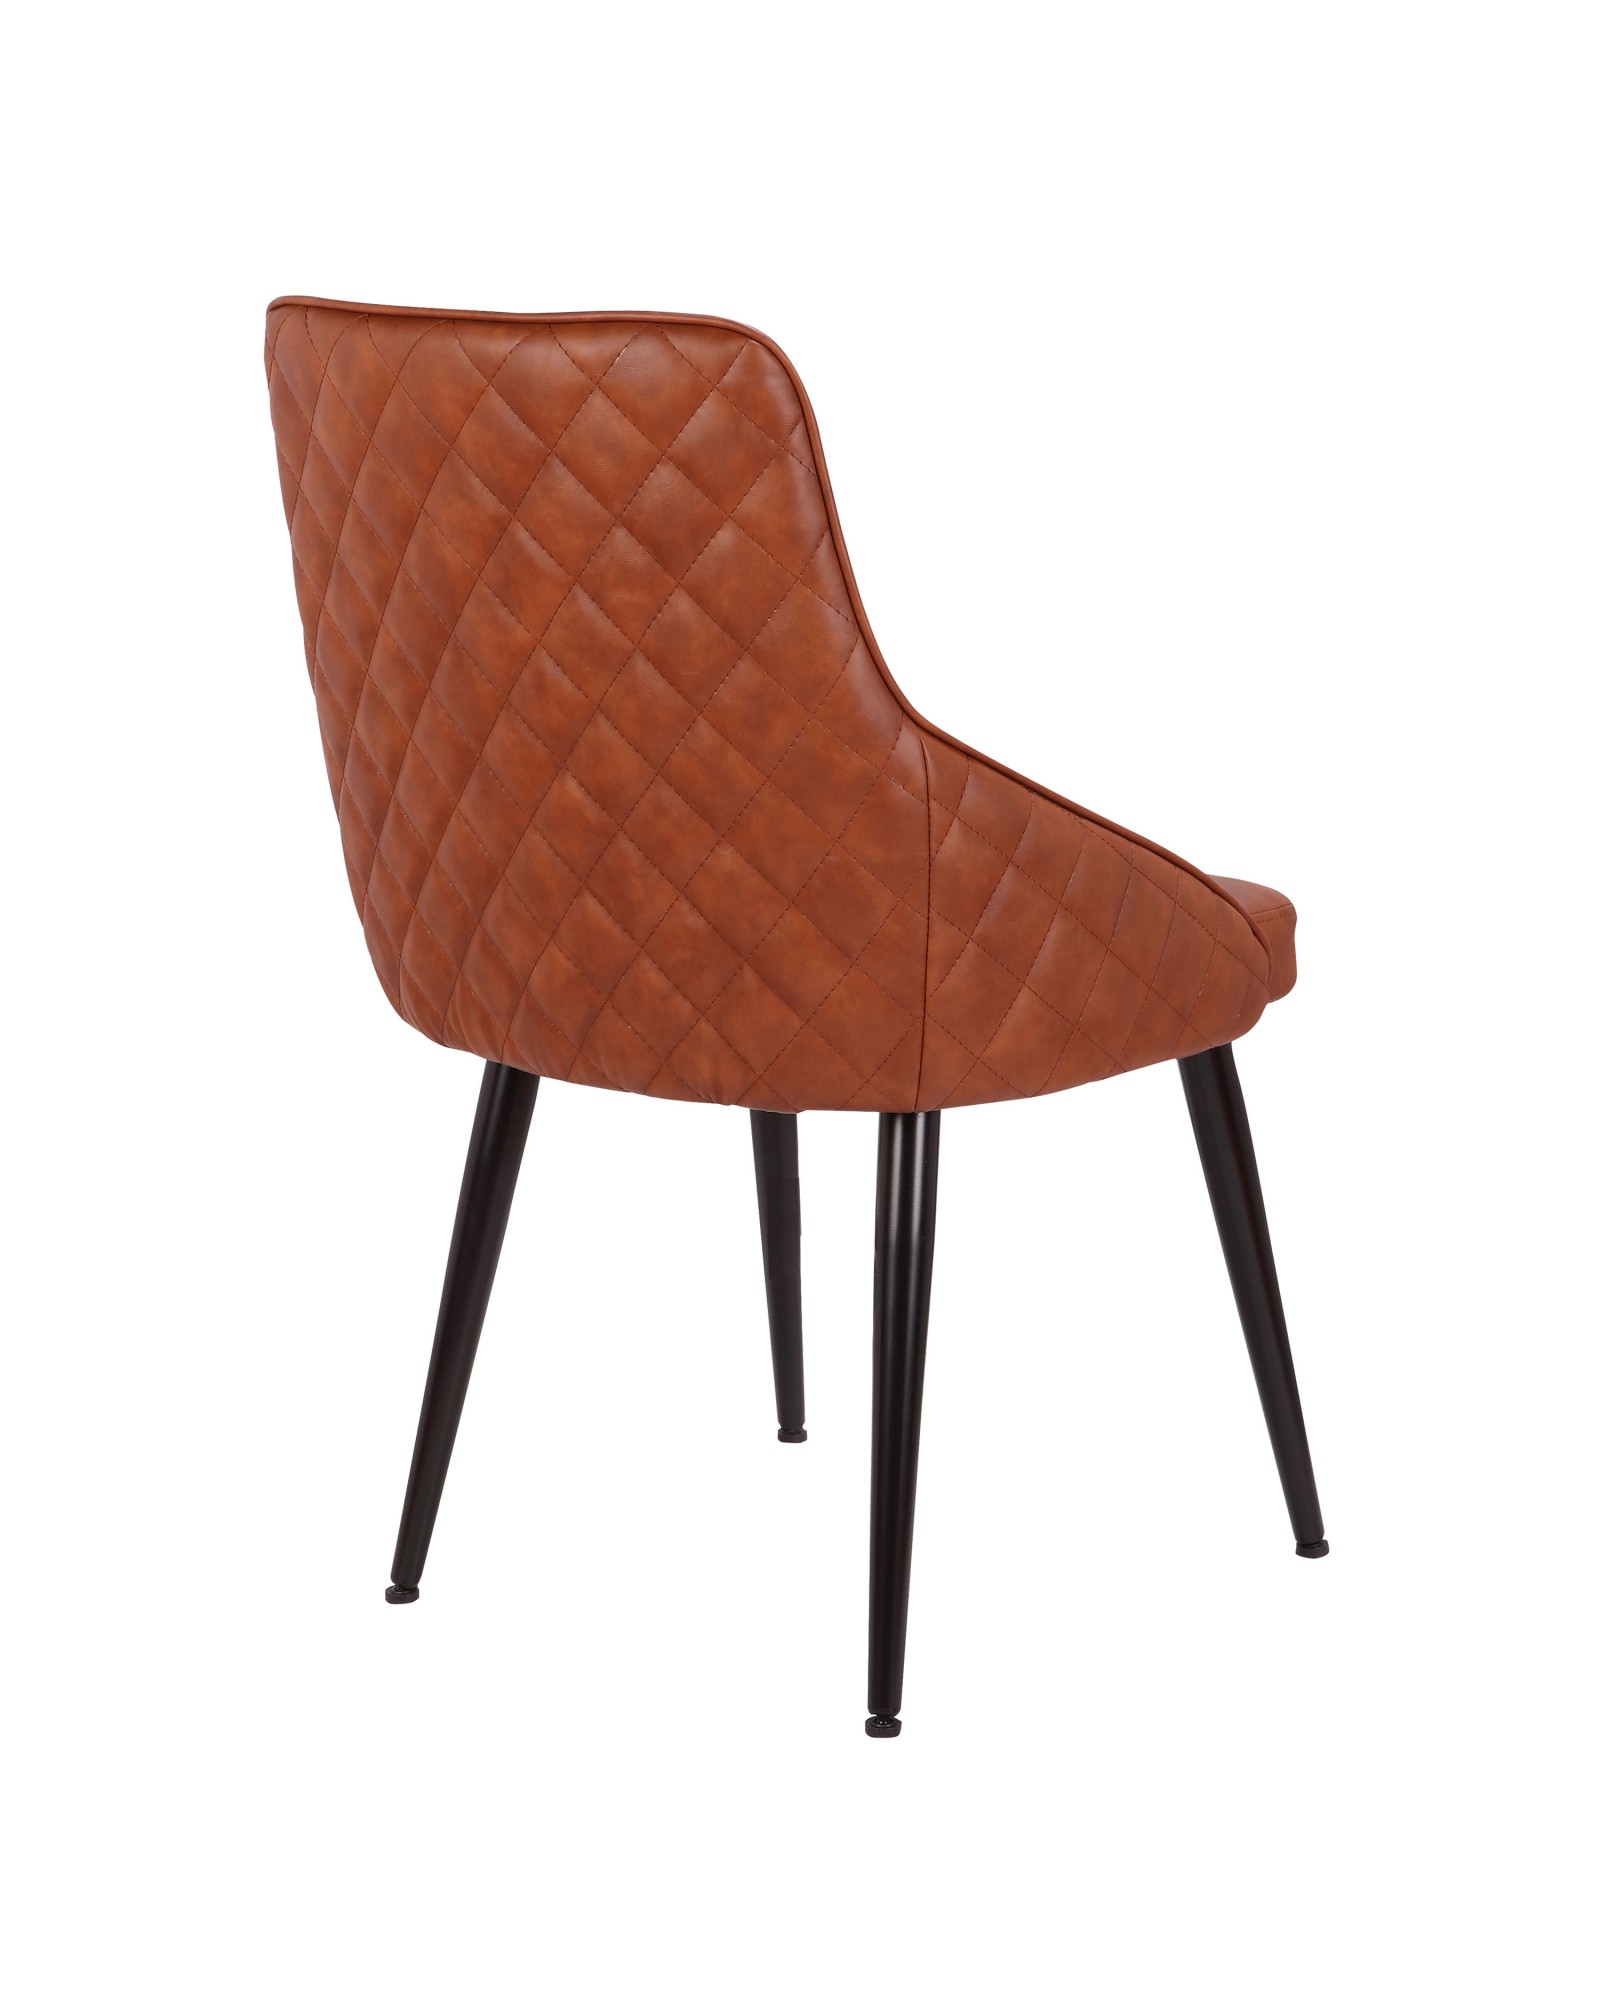 Alden Contemporary Dining/Accent Chair in Brown Faux Leather with Quilted Backrest - Set of 2